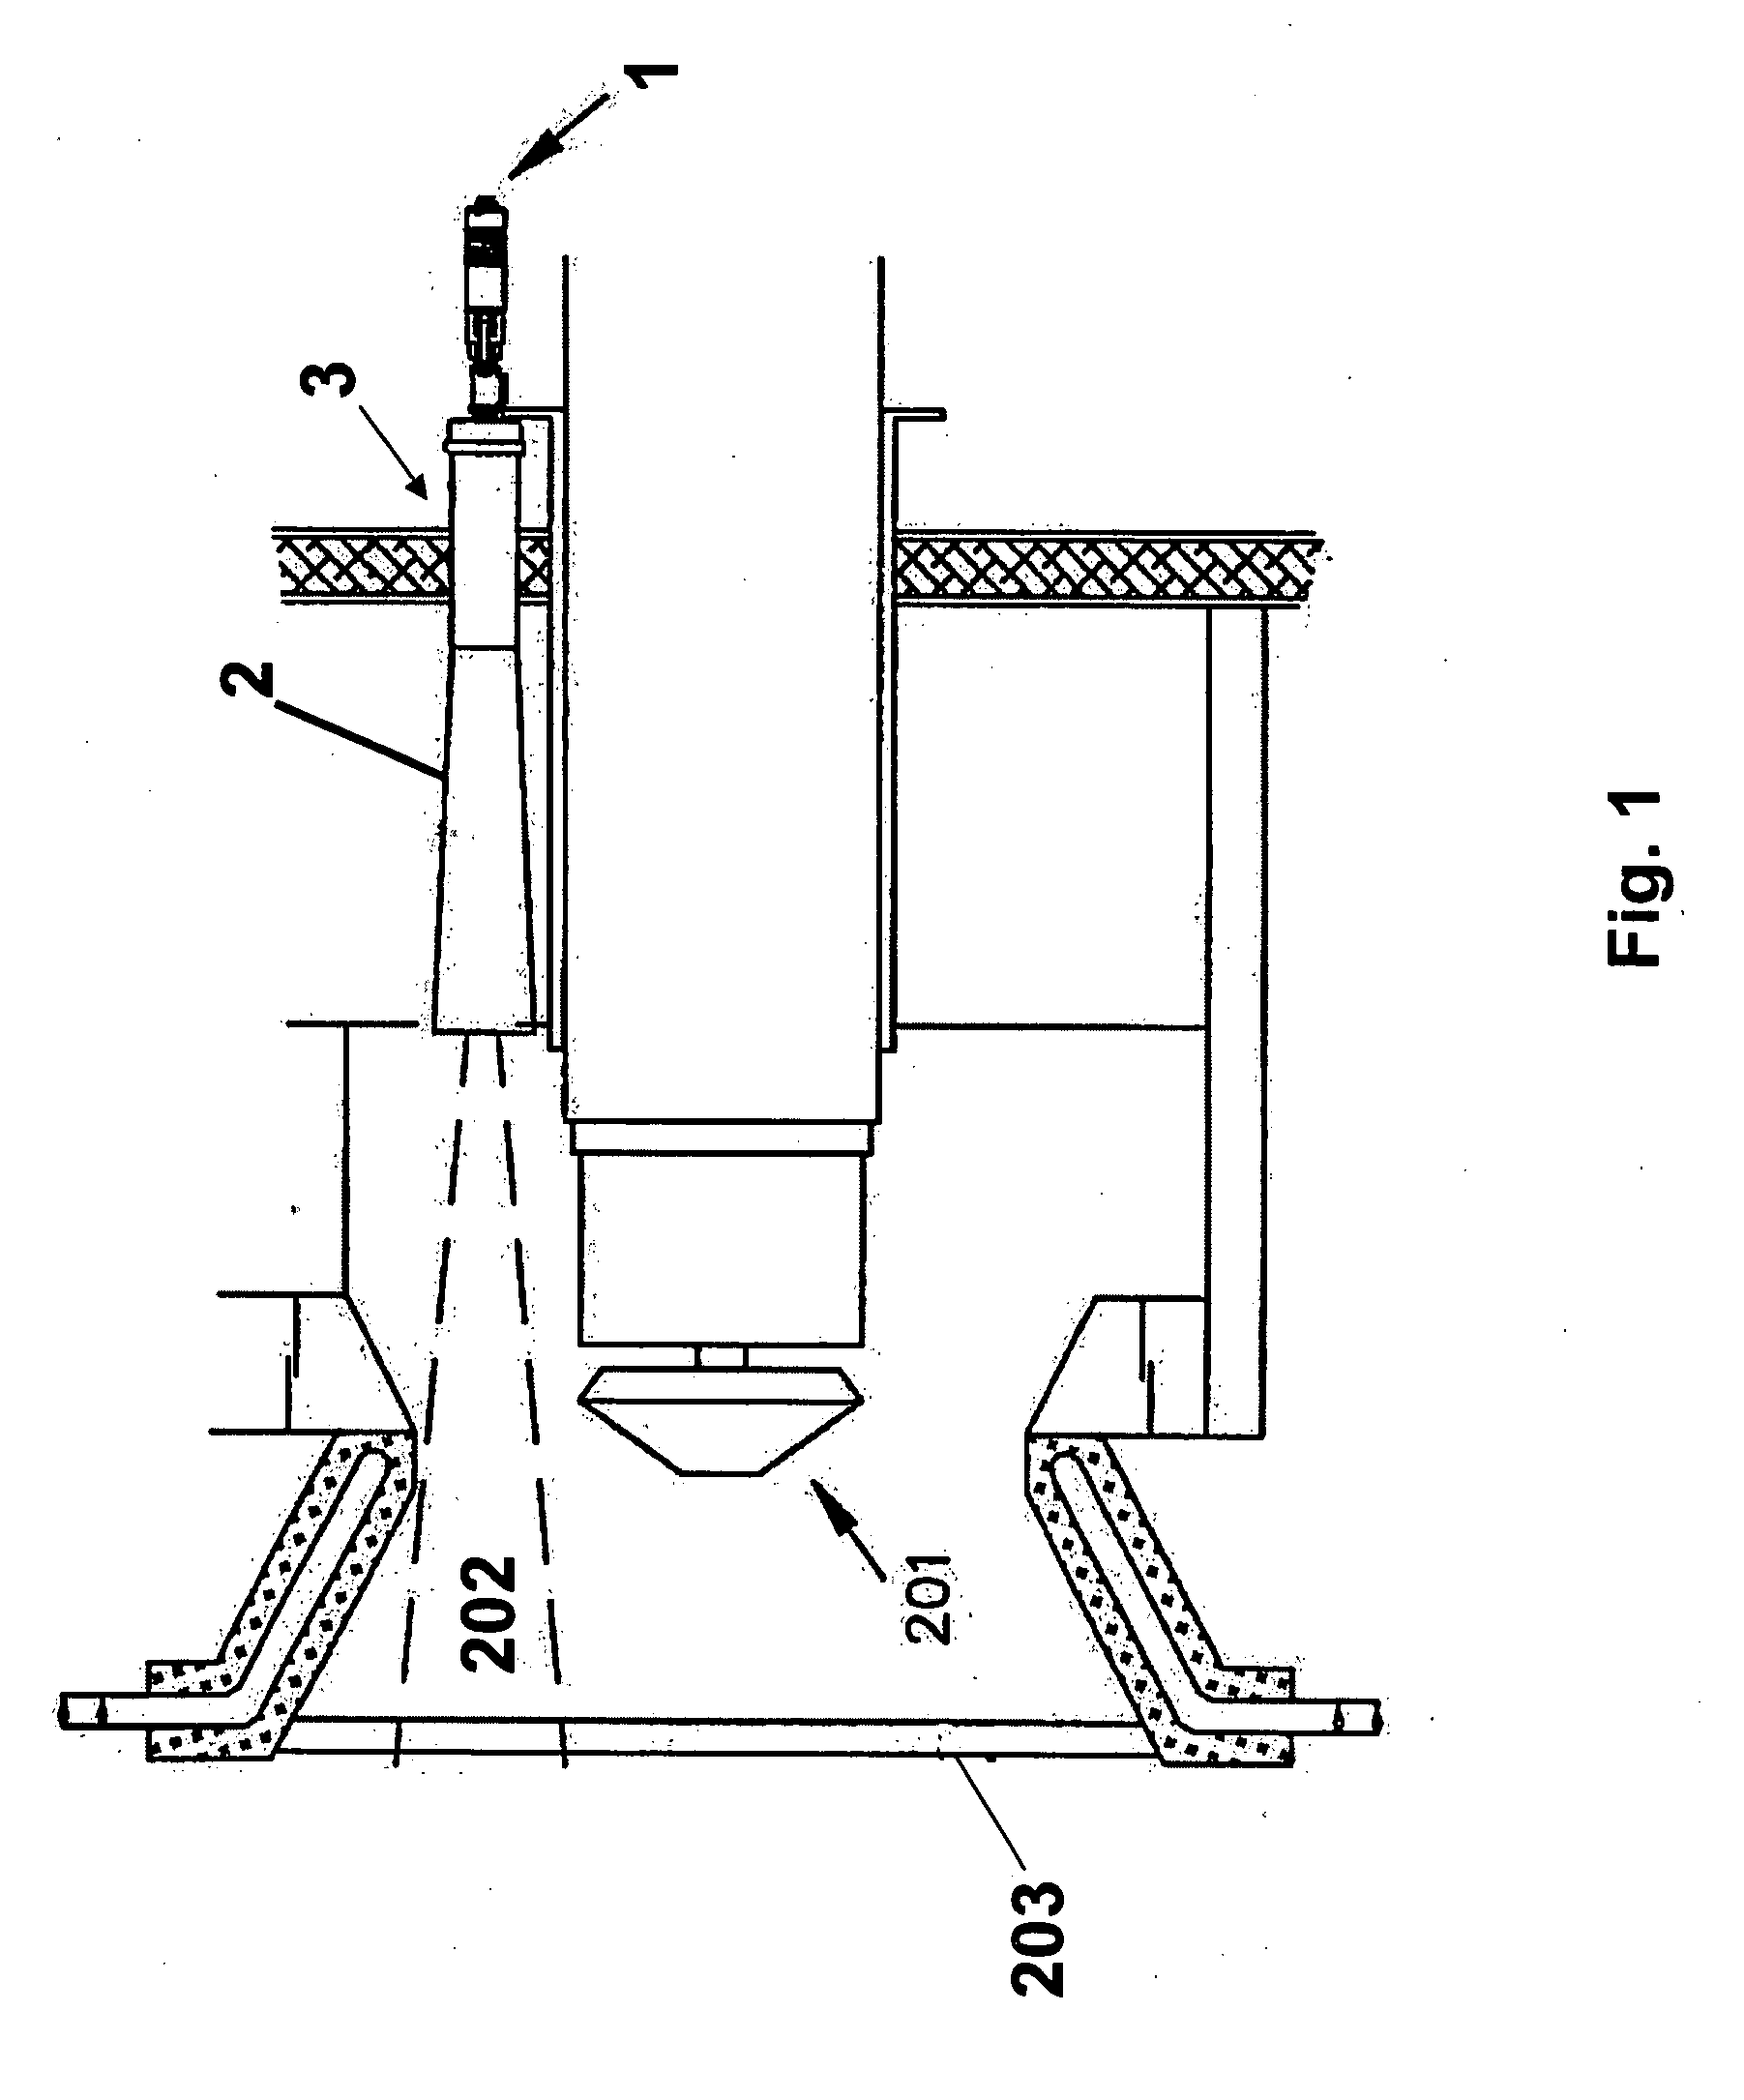 Flame detection device and method of detecting flame